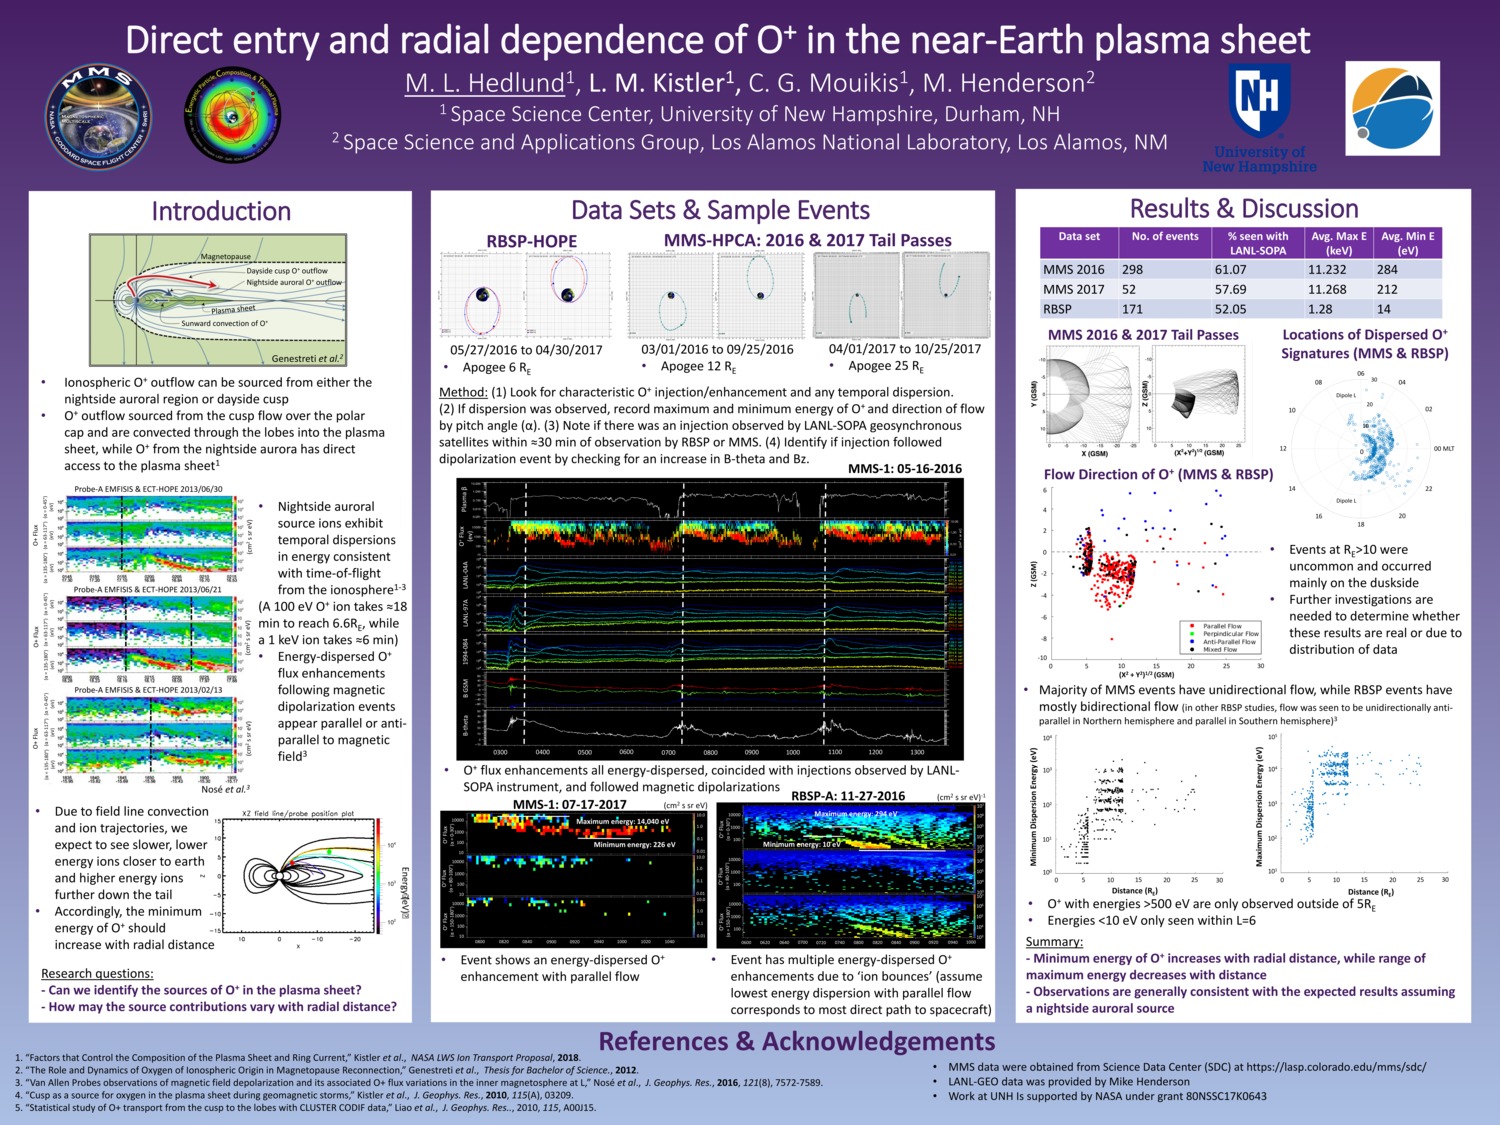 Direct Entry And Radial Dependence Of O+ In The Near-Earth Plasma Sheet by mlh1074